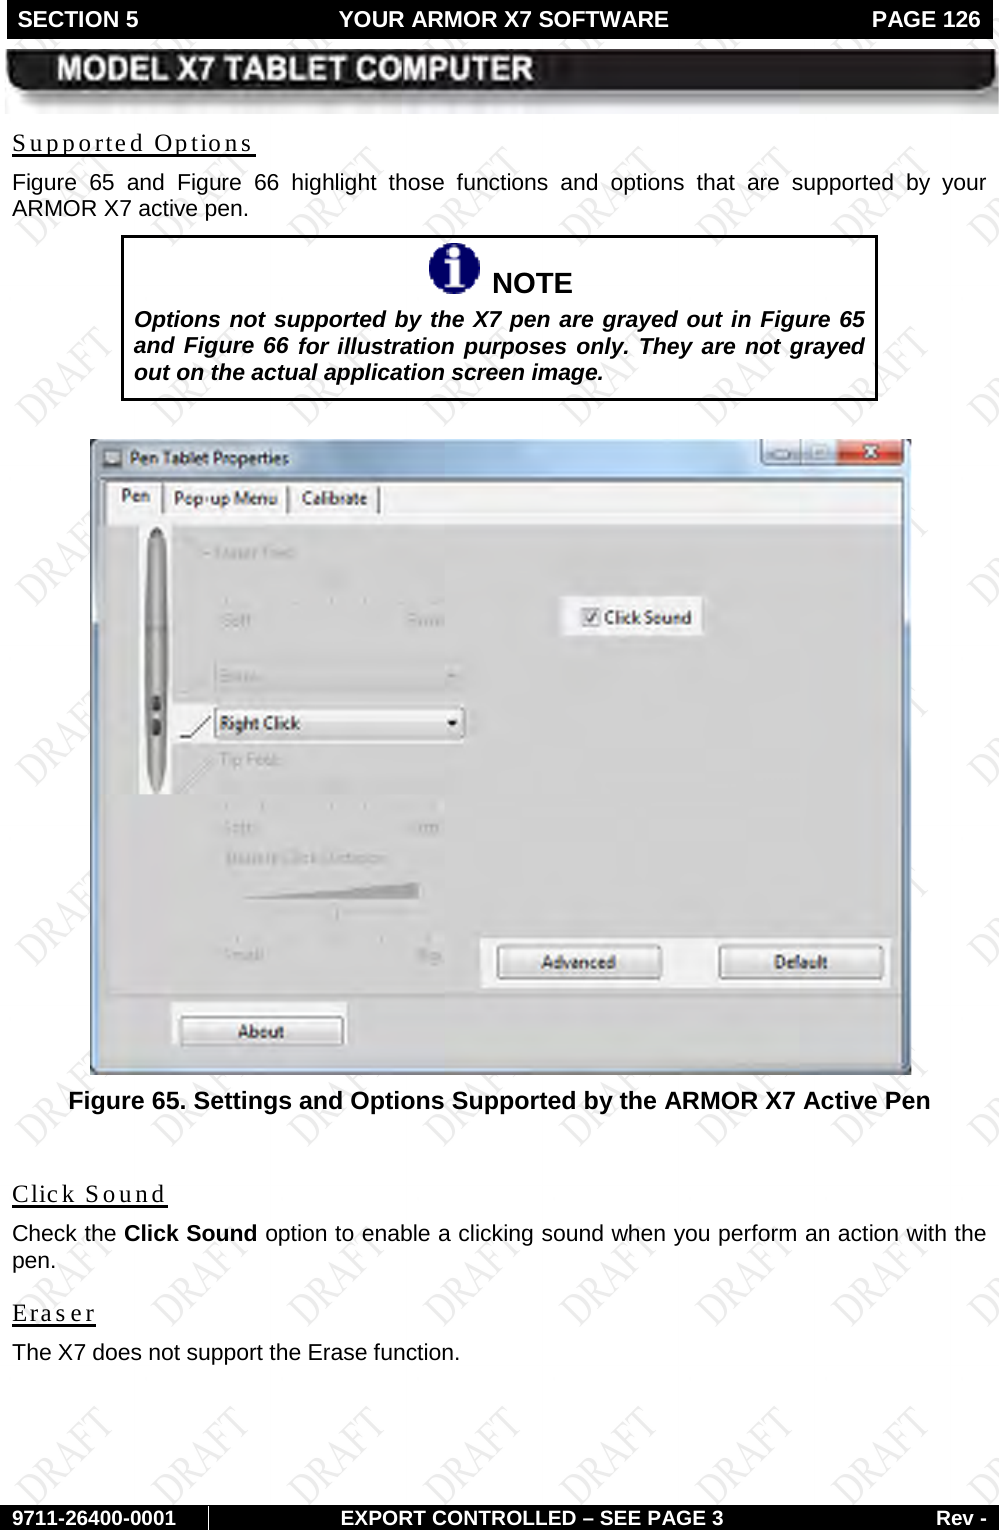 SECTION 5 YOUR ARMOR X7 SOFTWARE  PAGE 126        9711-26400-0001 EXPORT CONTROLLED – SEE PAGE 3 Rev - Figure  65Supported Options  and  Figure  66 highlight those functions and options that are supported by your ARMOR X7 active pen.   NOTE Options not supported by the X7 pen are grayed out in Figure 65 and Figure 66 for illustration purposes only. They are not grayed out on the actual application screen image.   Figure 65. Settings and Options Supported by the ARMOR X7 Active Pen  Check the Click Sound option to enable a clicking sound when you perform an action with the pen. Click Sound  The X7 does not support the Erase function. Eraser   